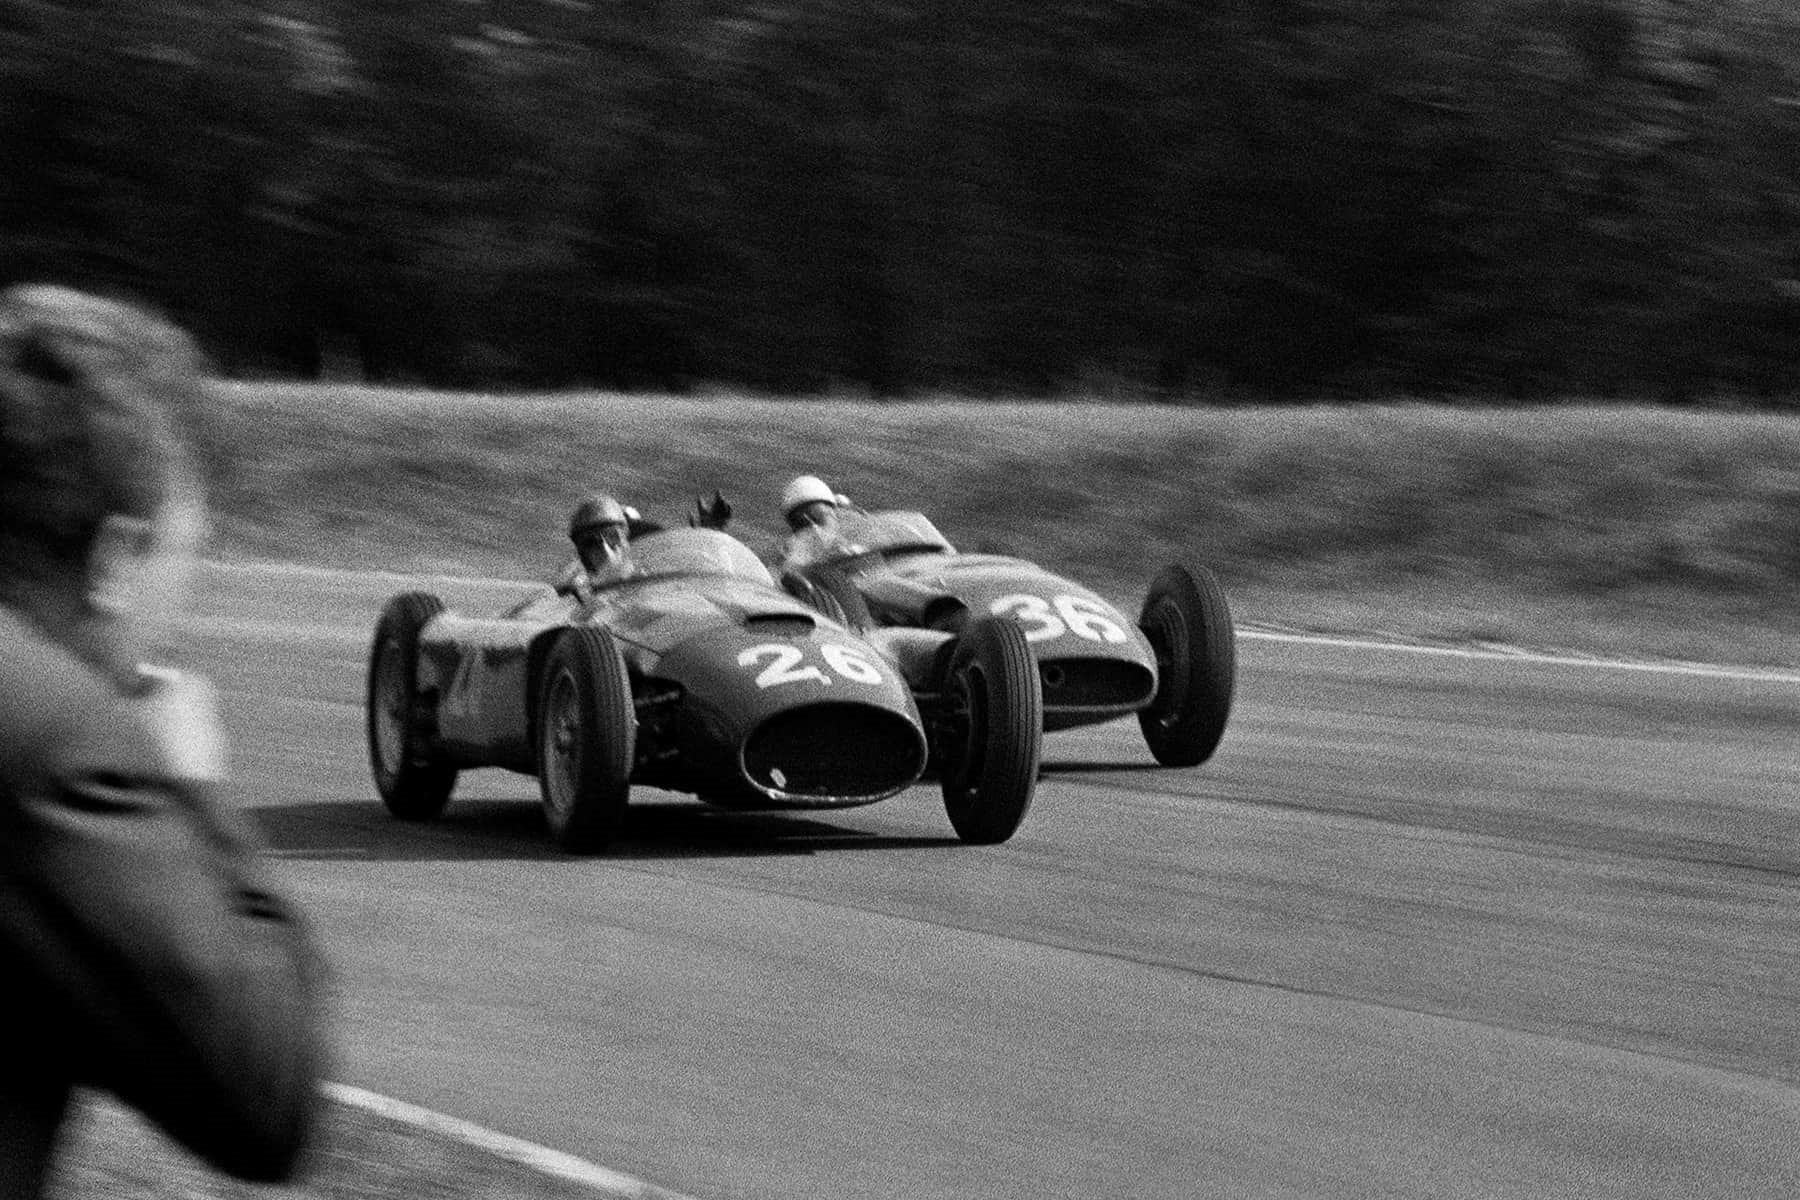 Stirling Moss in action.